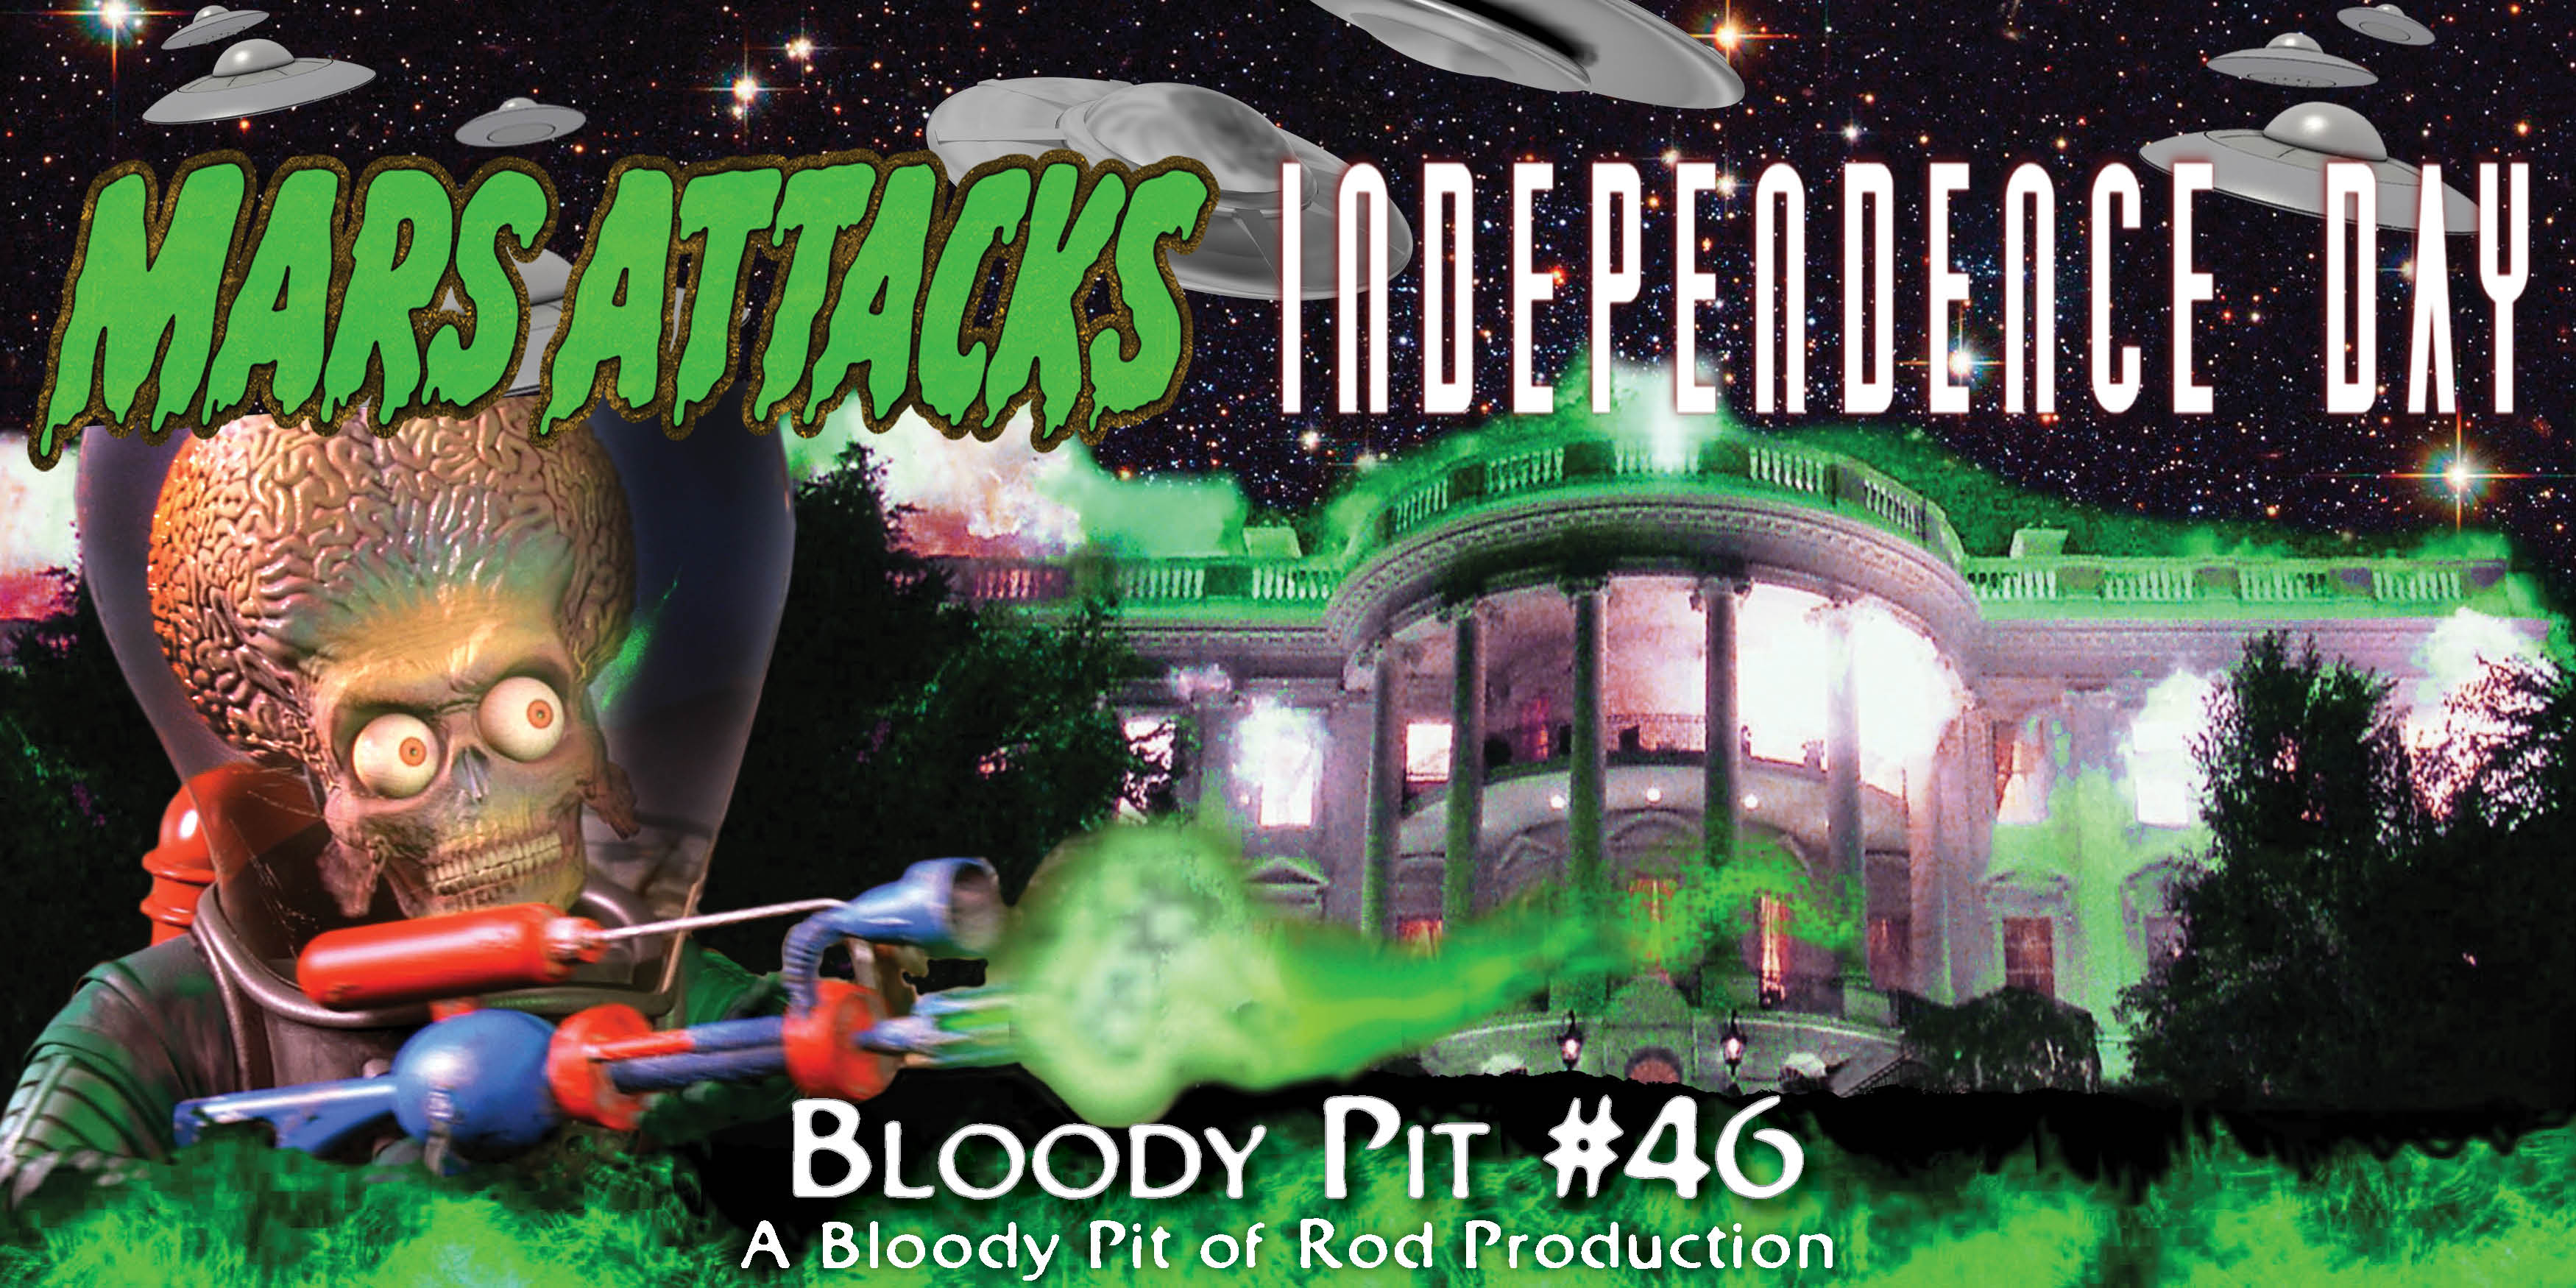 The Bloody Pit #46 - MARS ATTACKS! (1996) 